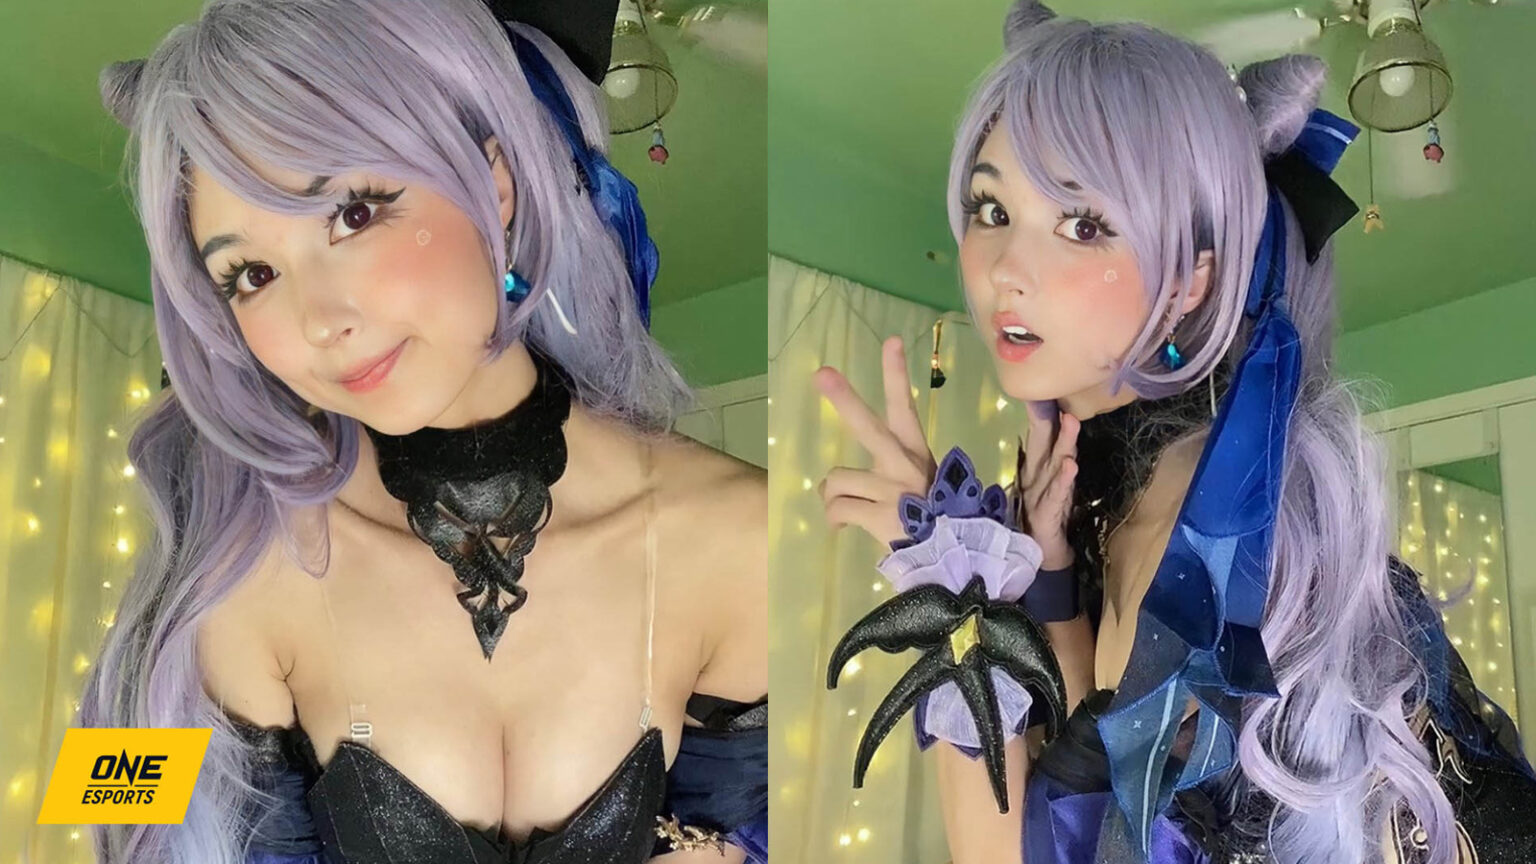 Sweet Opulent Splendor Keqing Cosplay From Genshin Will Give You Sparks One Esports